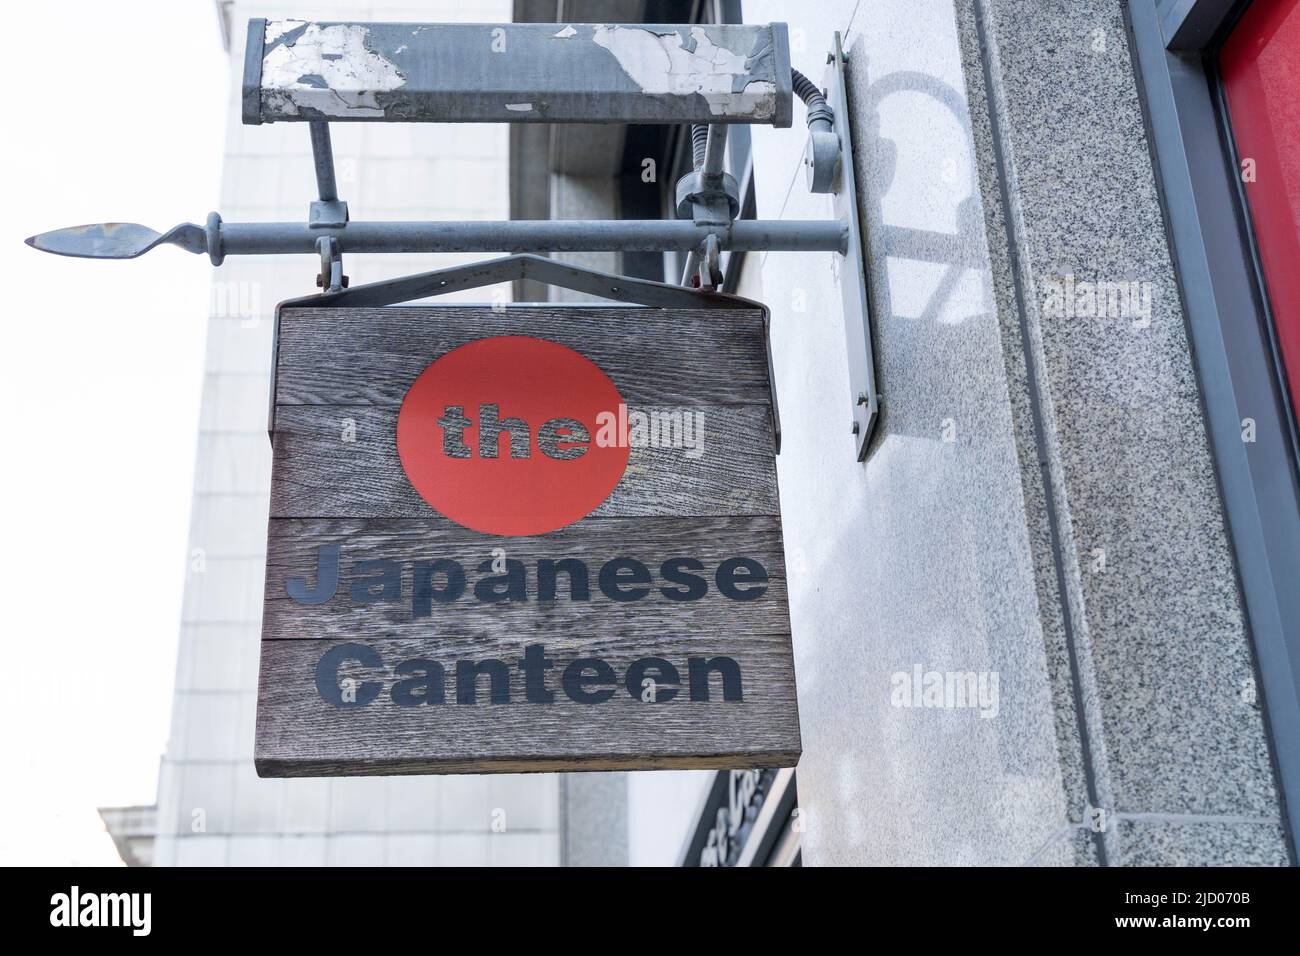 The logo for the fast food restaurant The Japanese Canteen in London England UK Stock Photo